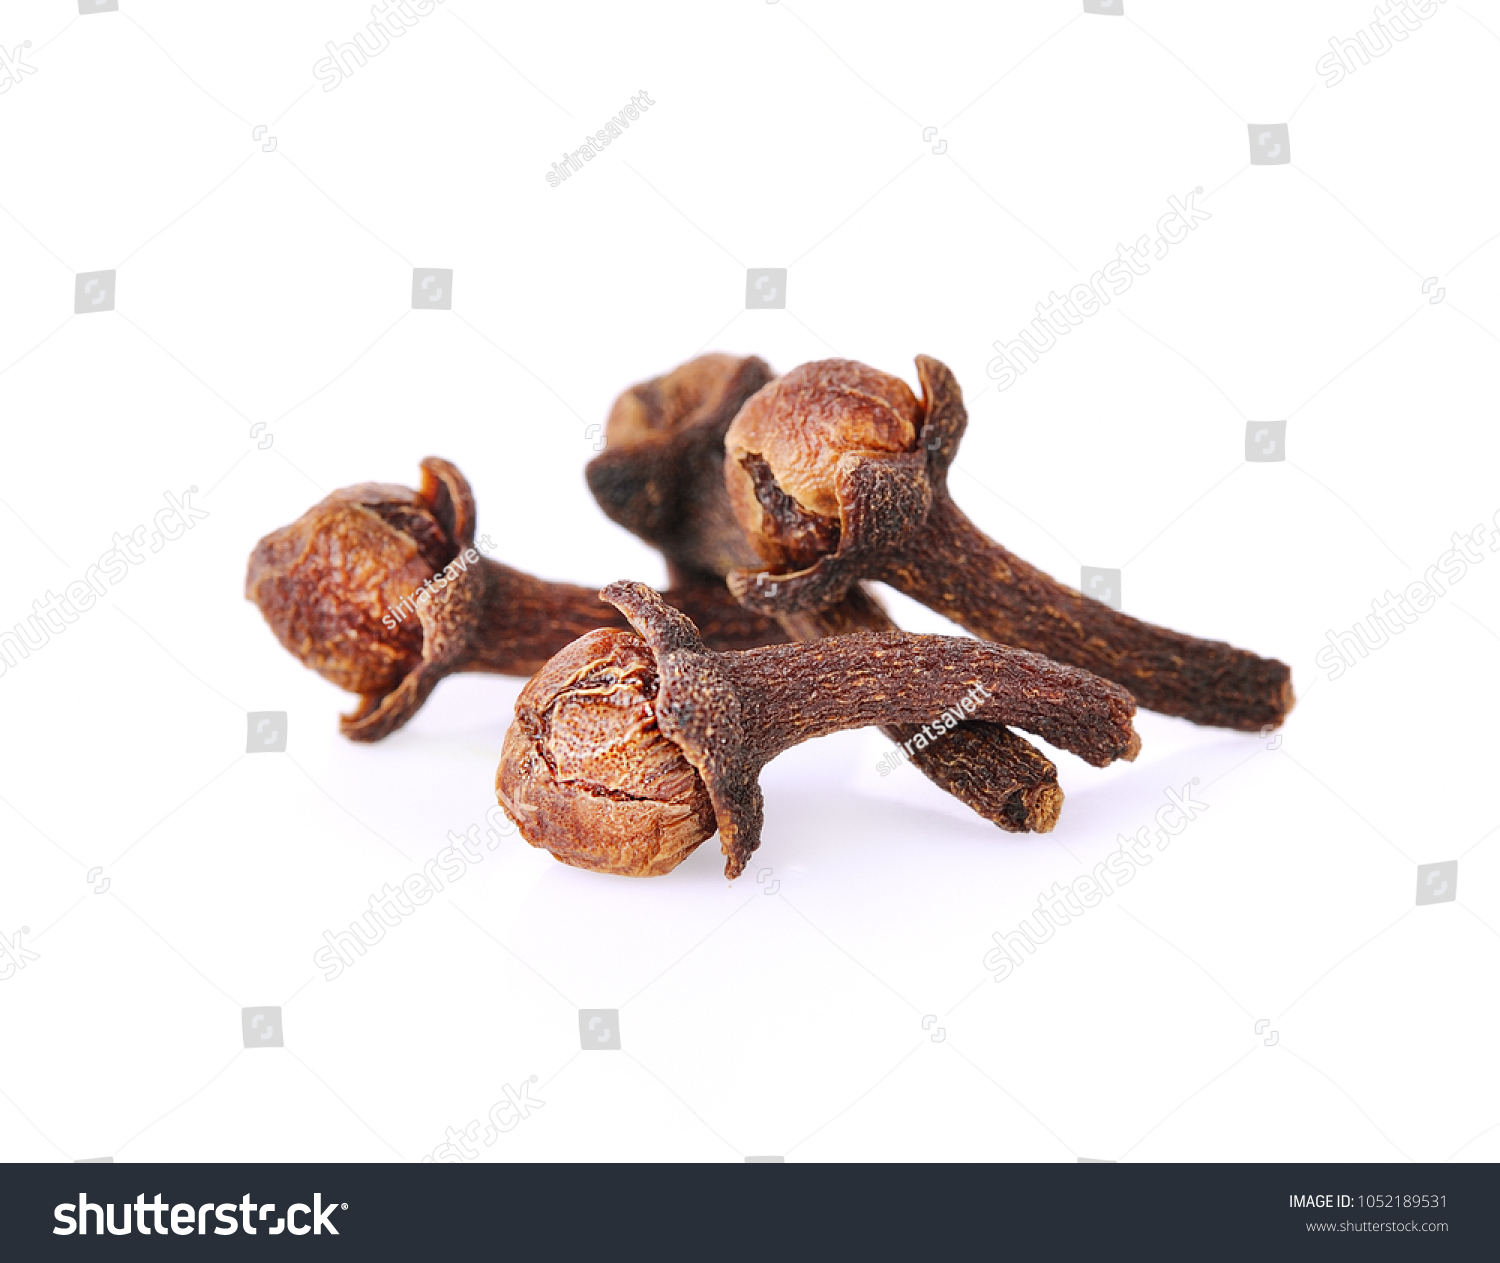 Cloves (flower buds of Syzygium aromaticum). Clipping paths, shadow separated #1052189531